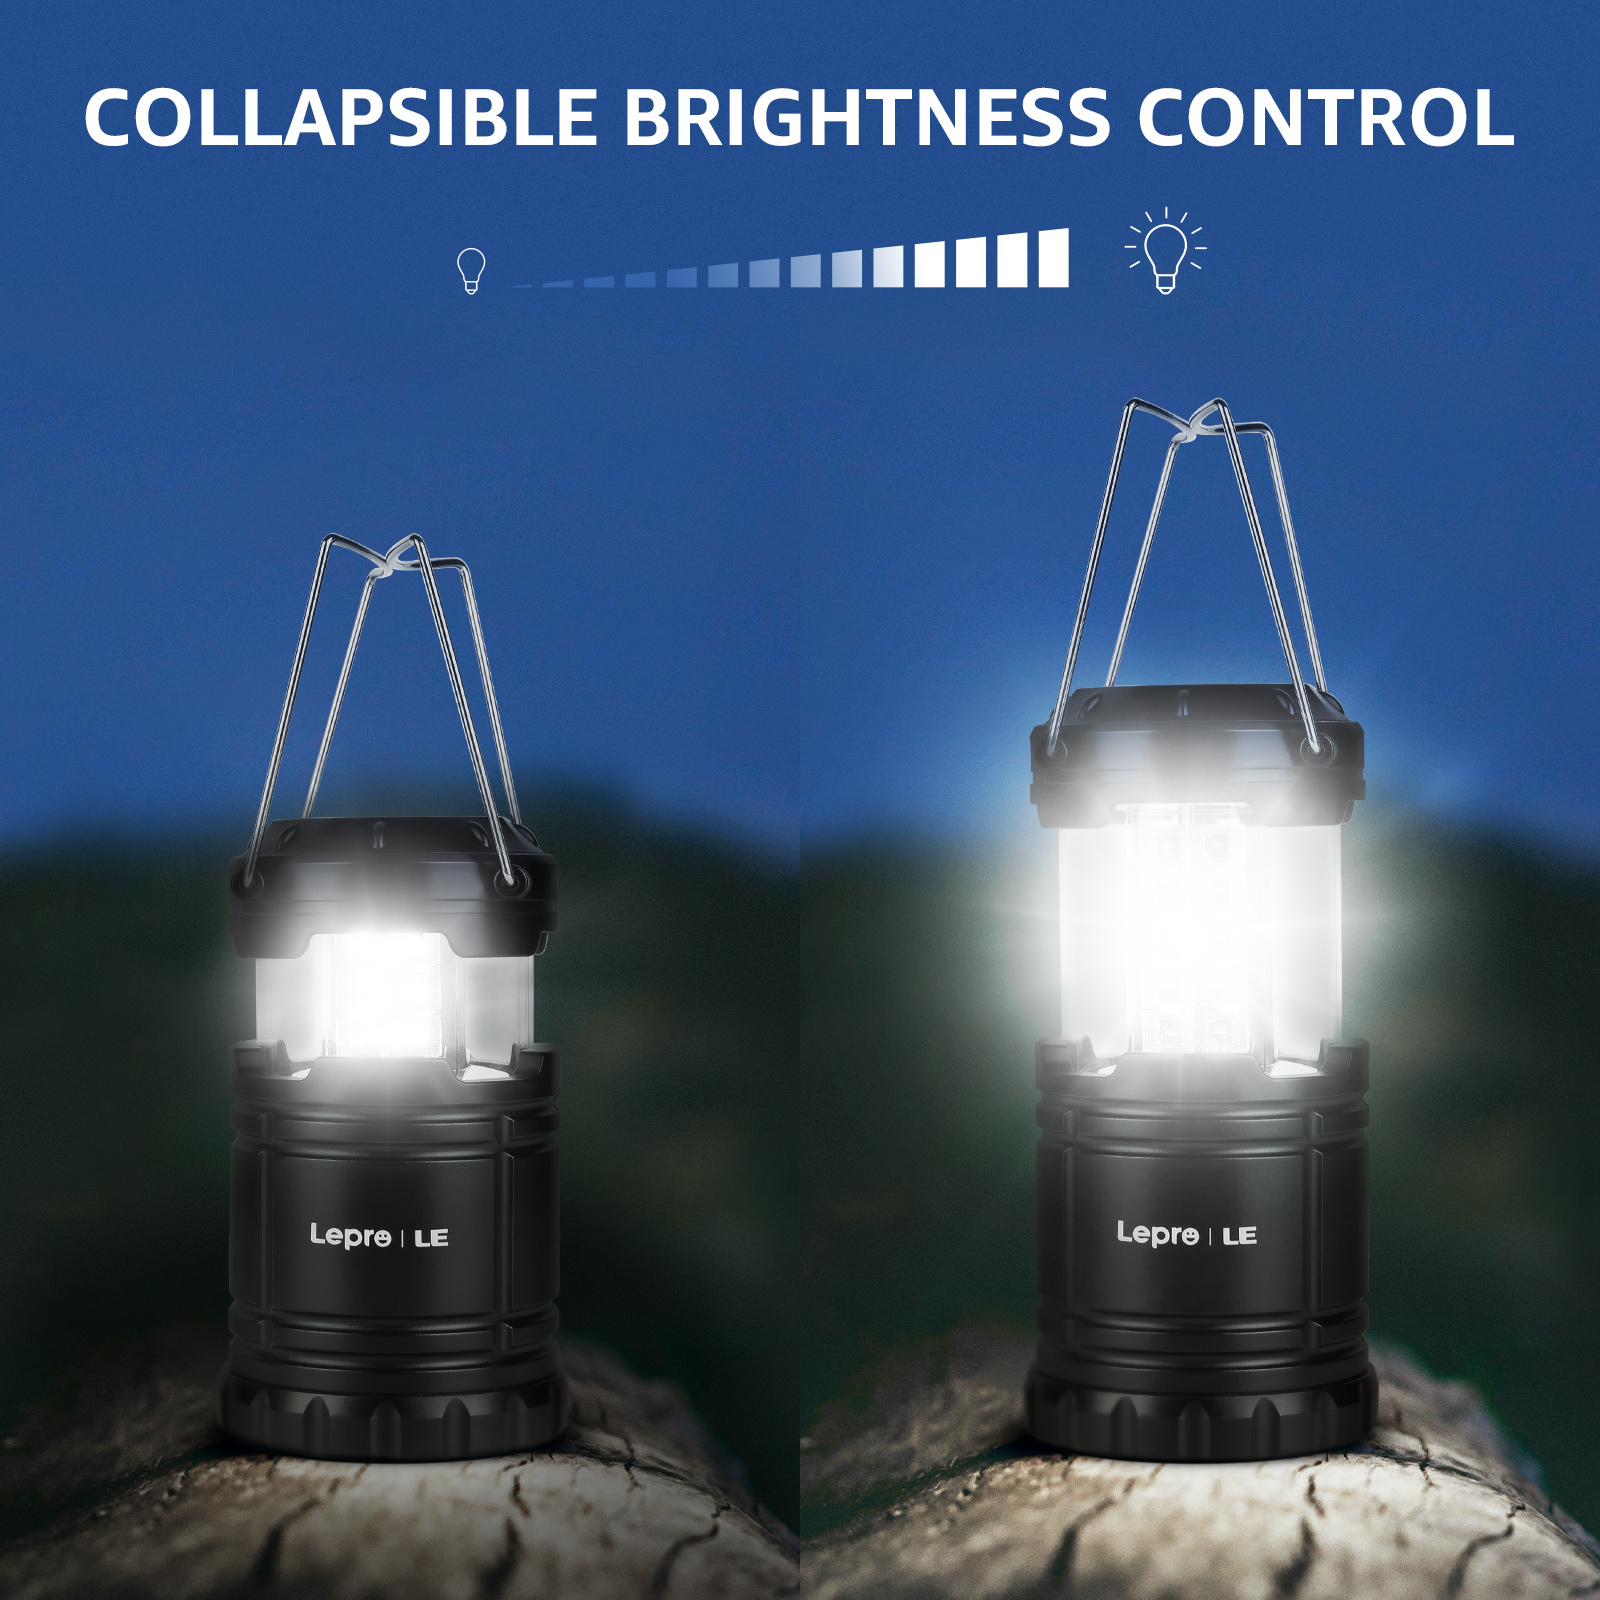 Lepro LED Collapsible Camping Lantern, Super Bright, Battery Powered ...